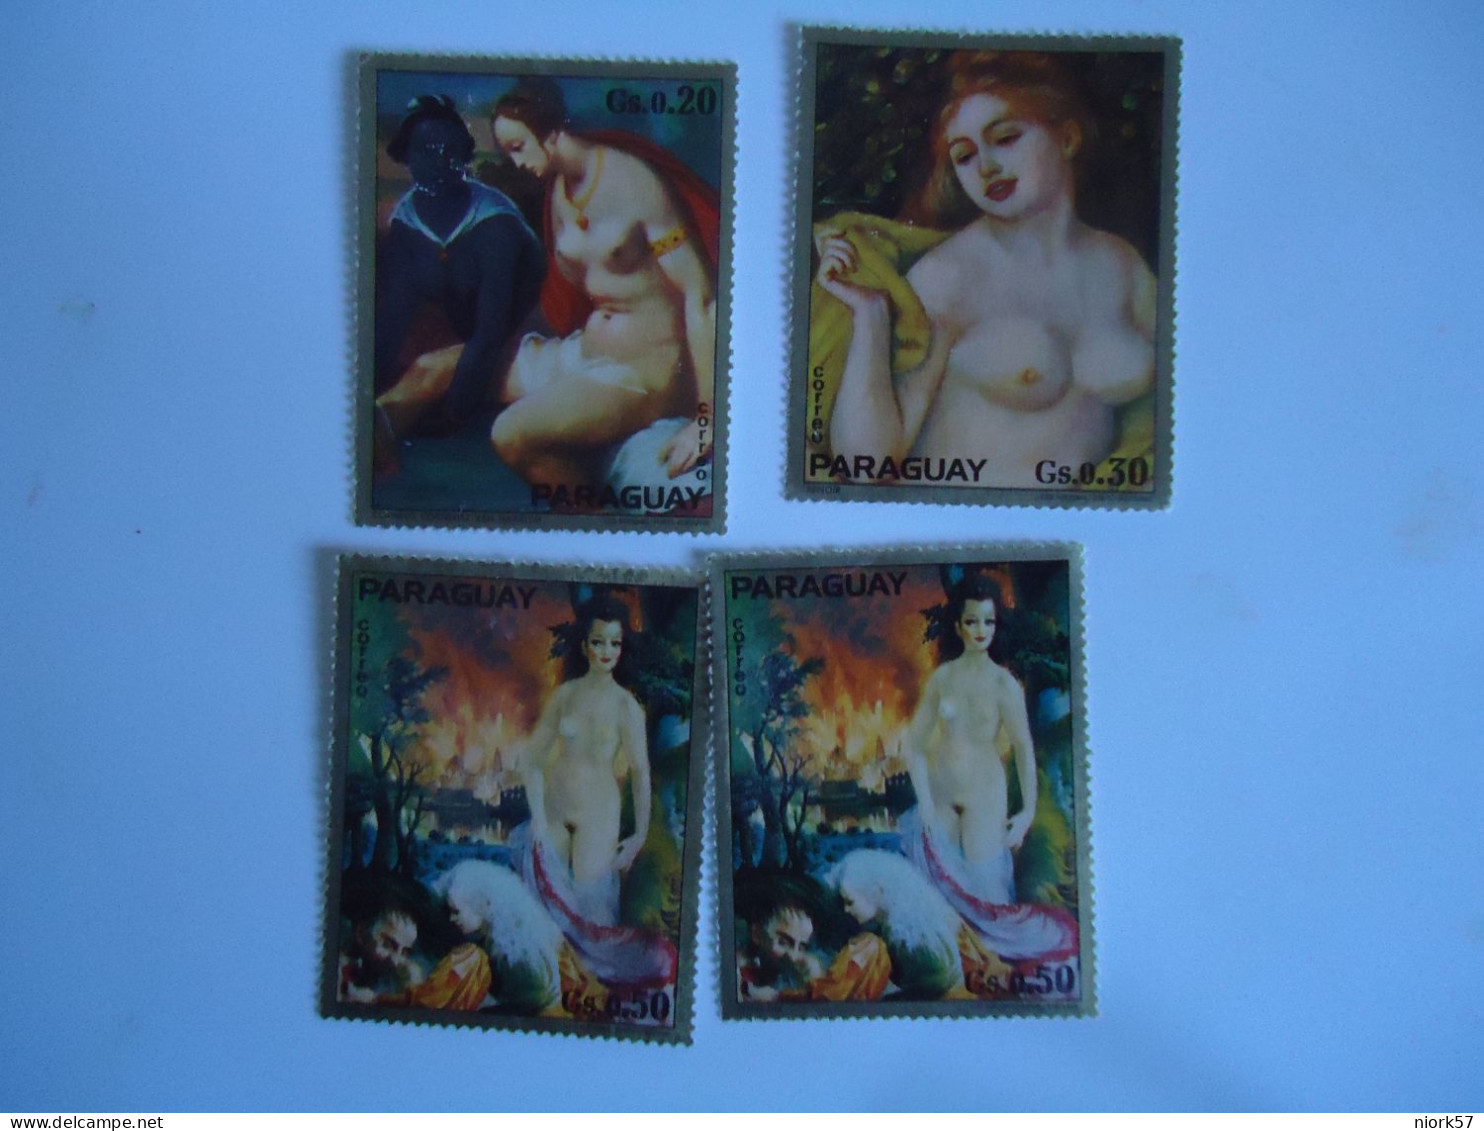 PARAGUAY  MNH 3 MLN 1 4 STAMPS  PAINTINGS NUDES - Nudi